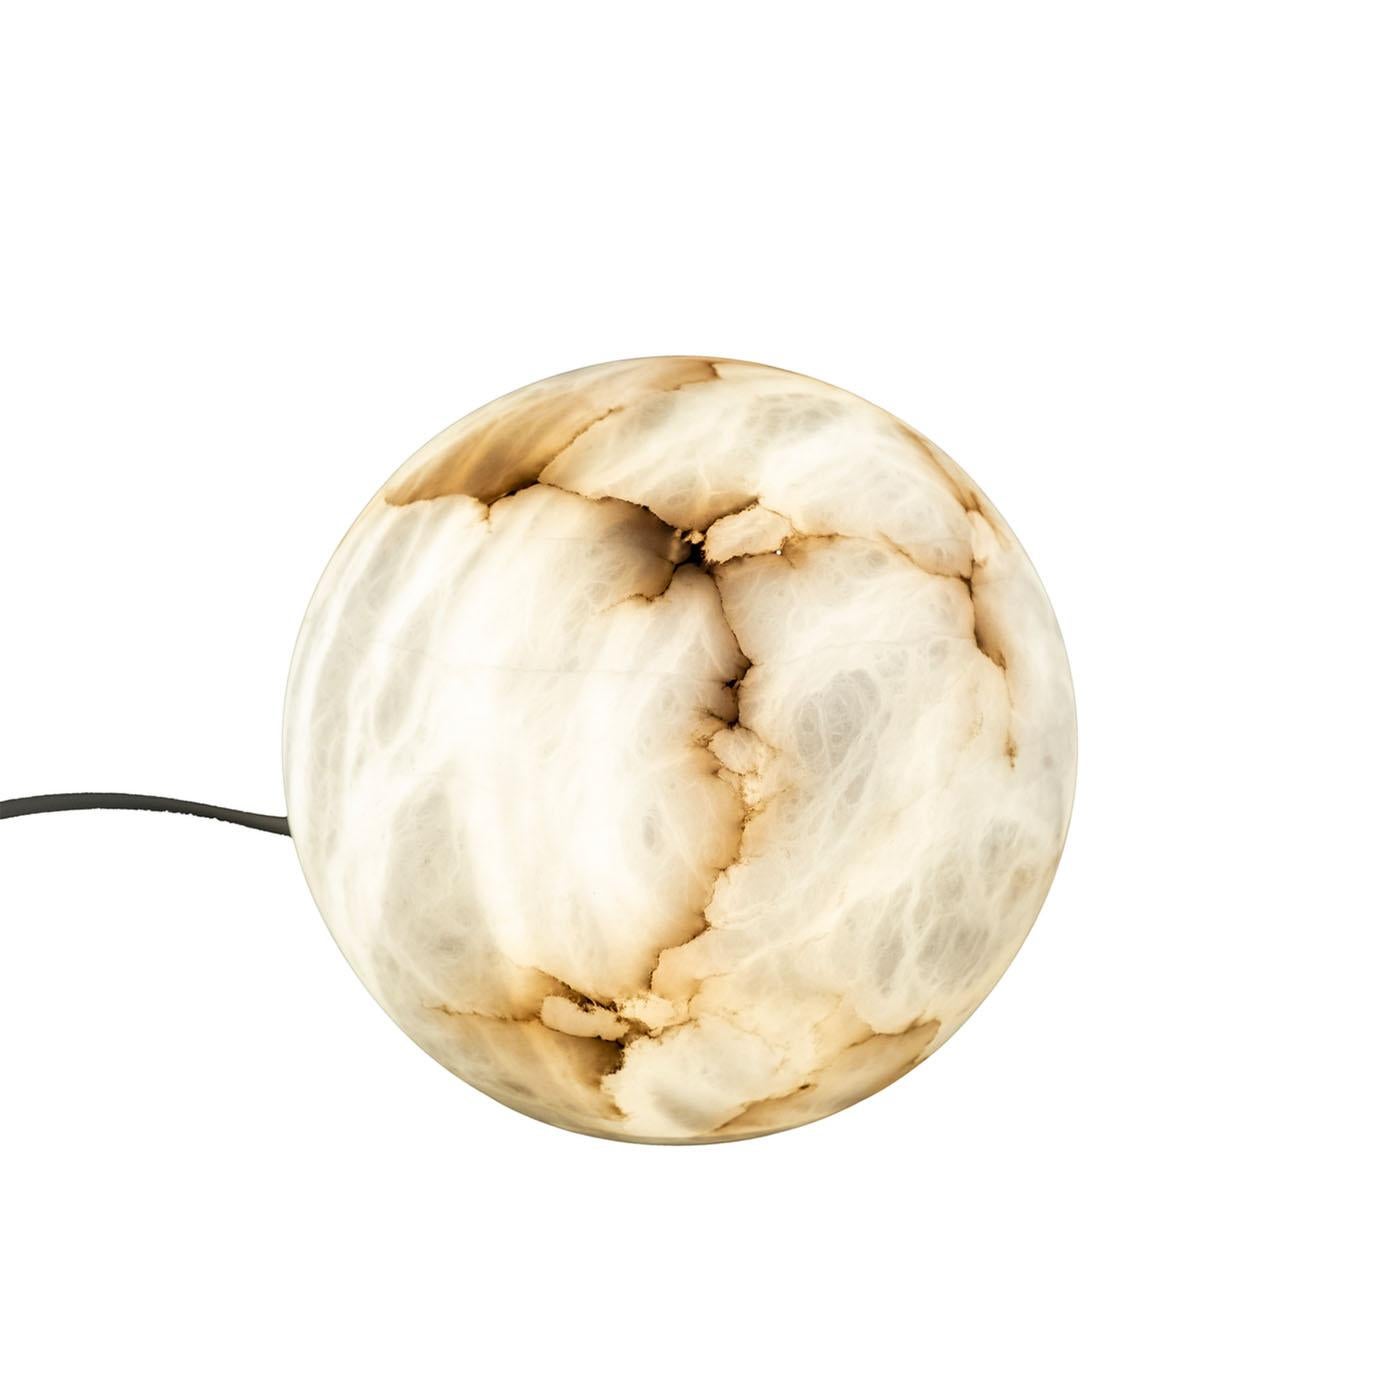 Natural round-shaped alabaster table lamp. The veins are the main characteristic of alabaster stone, ranging from white to brown. When the lamp is turned on, all the various nuances are highlighted, making the lamp a unique piece that enriches the